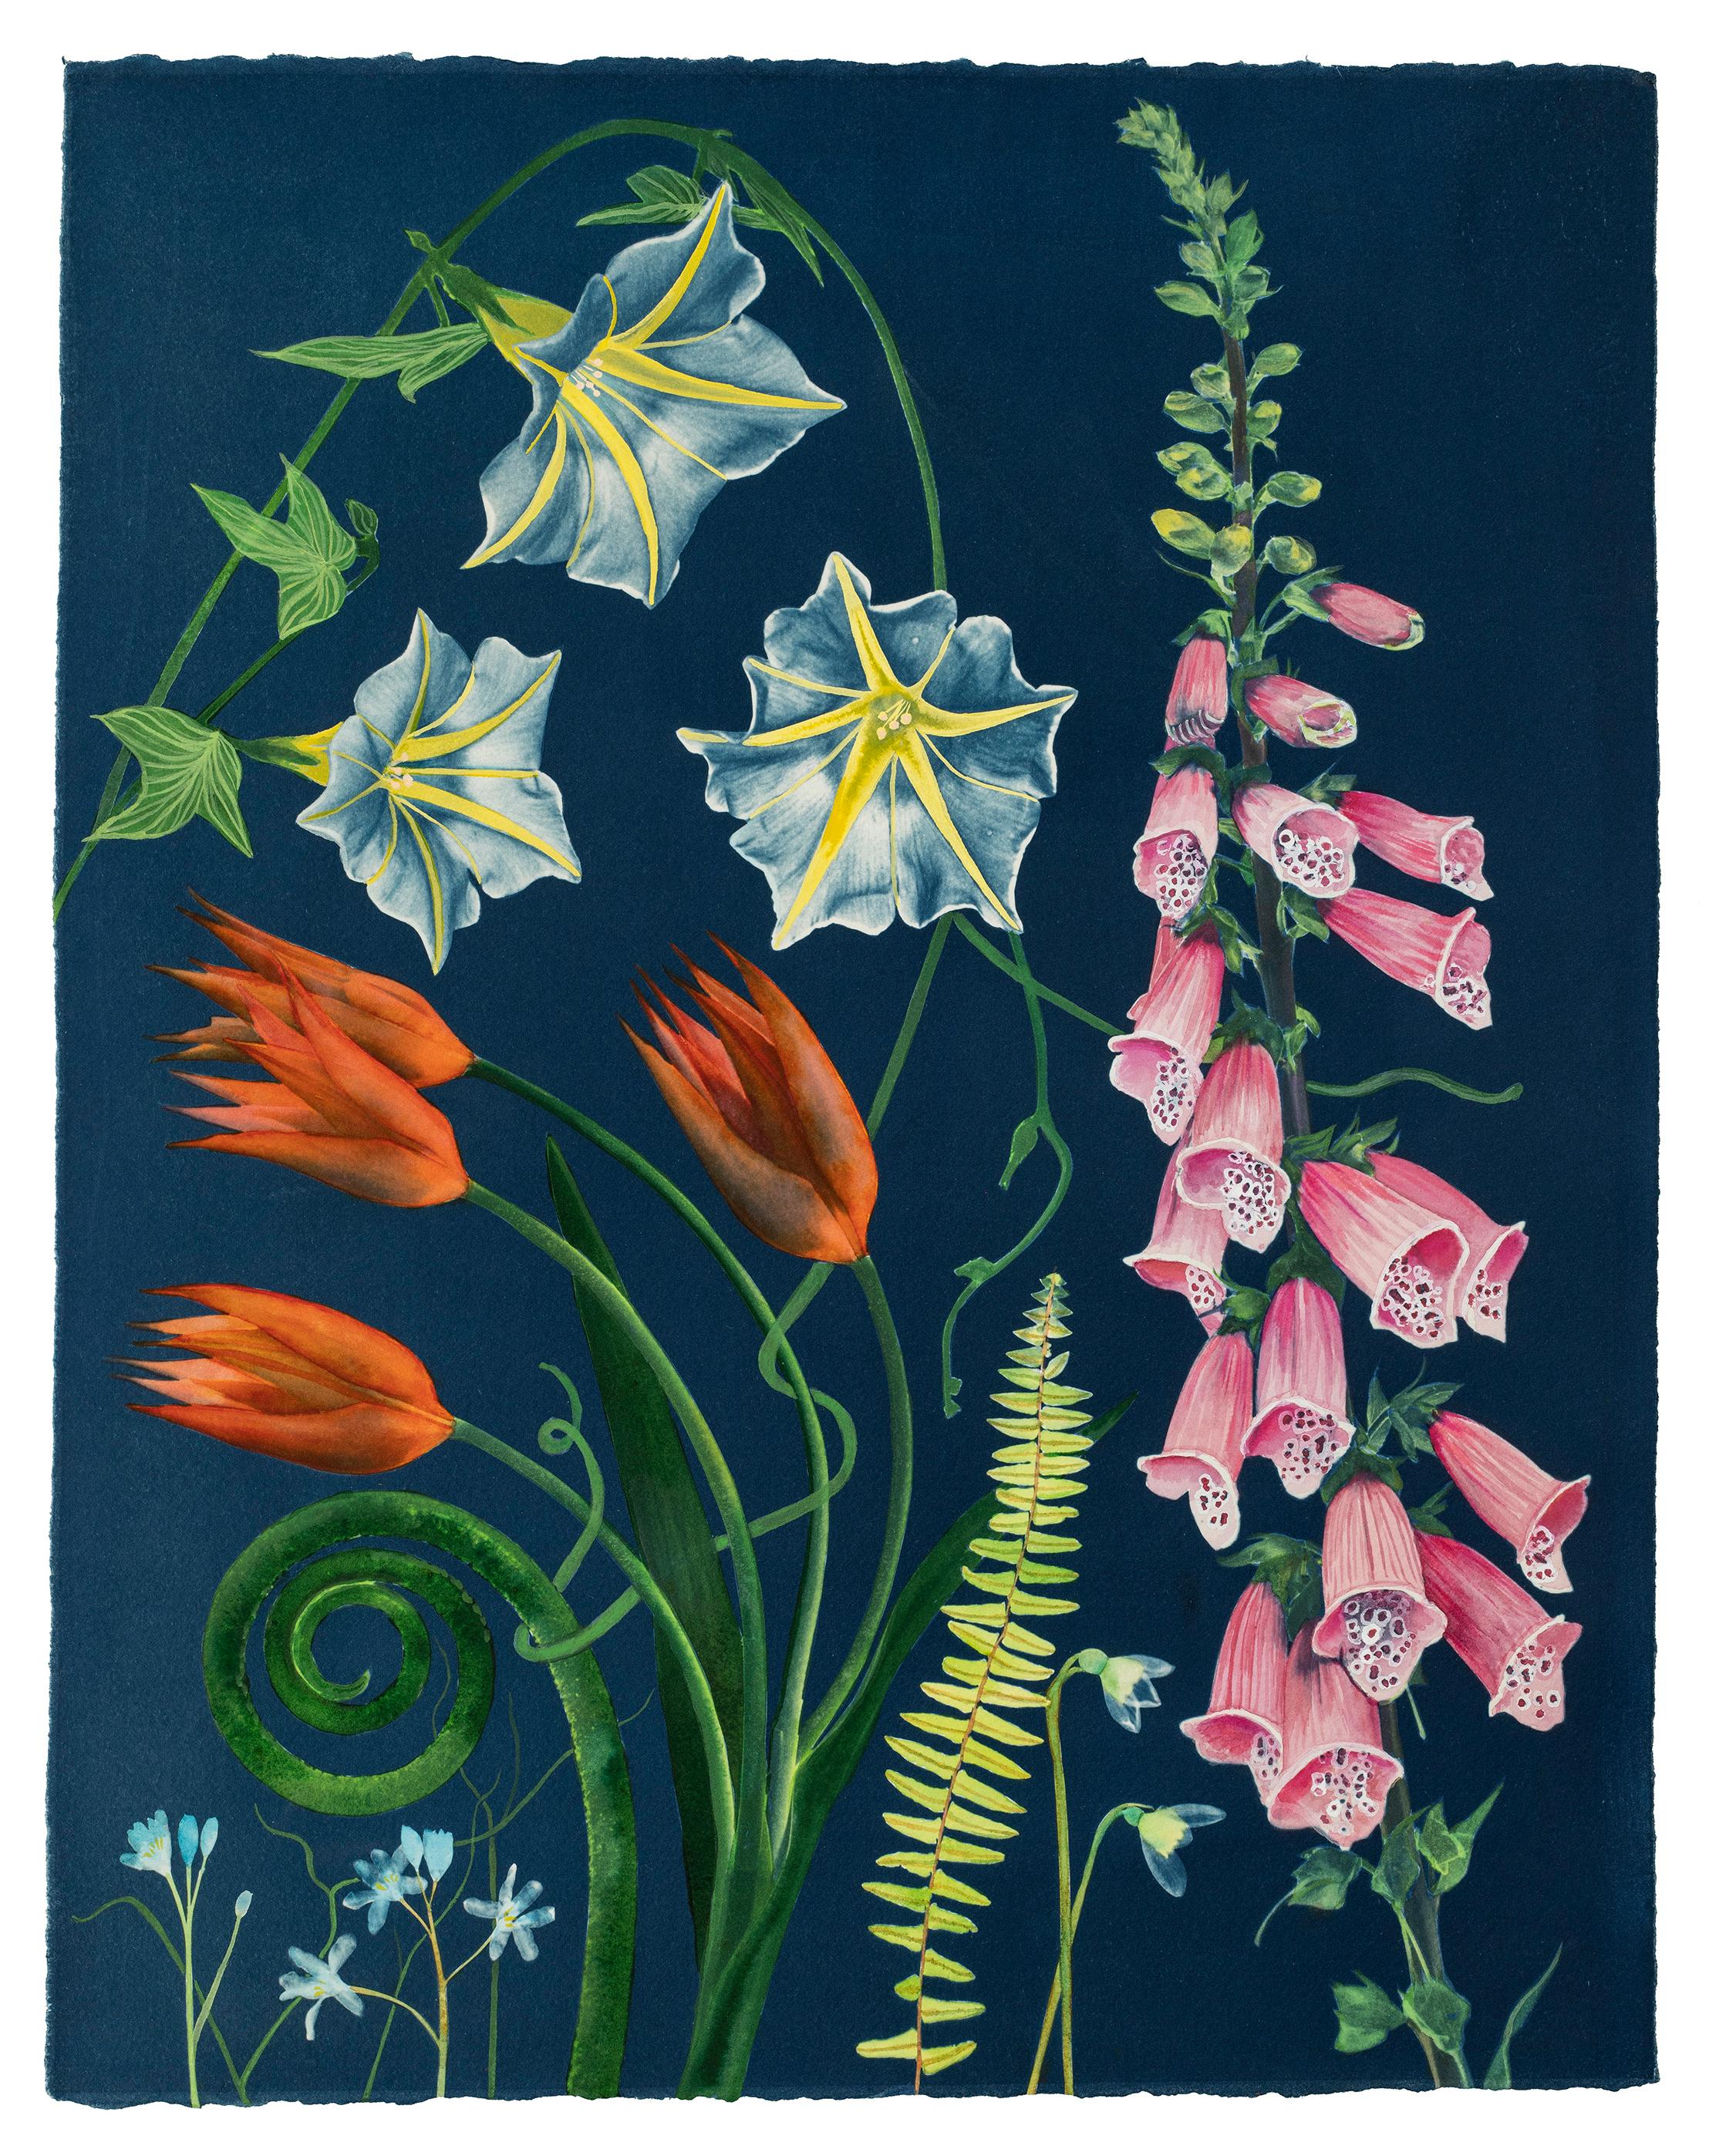 Picturesque Botany (Still Life Painting of Colorful Flowers on Indigo Blue) - Contemporary Mixed Media Art by Julia Whitney Barnes